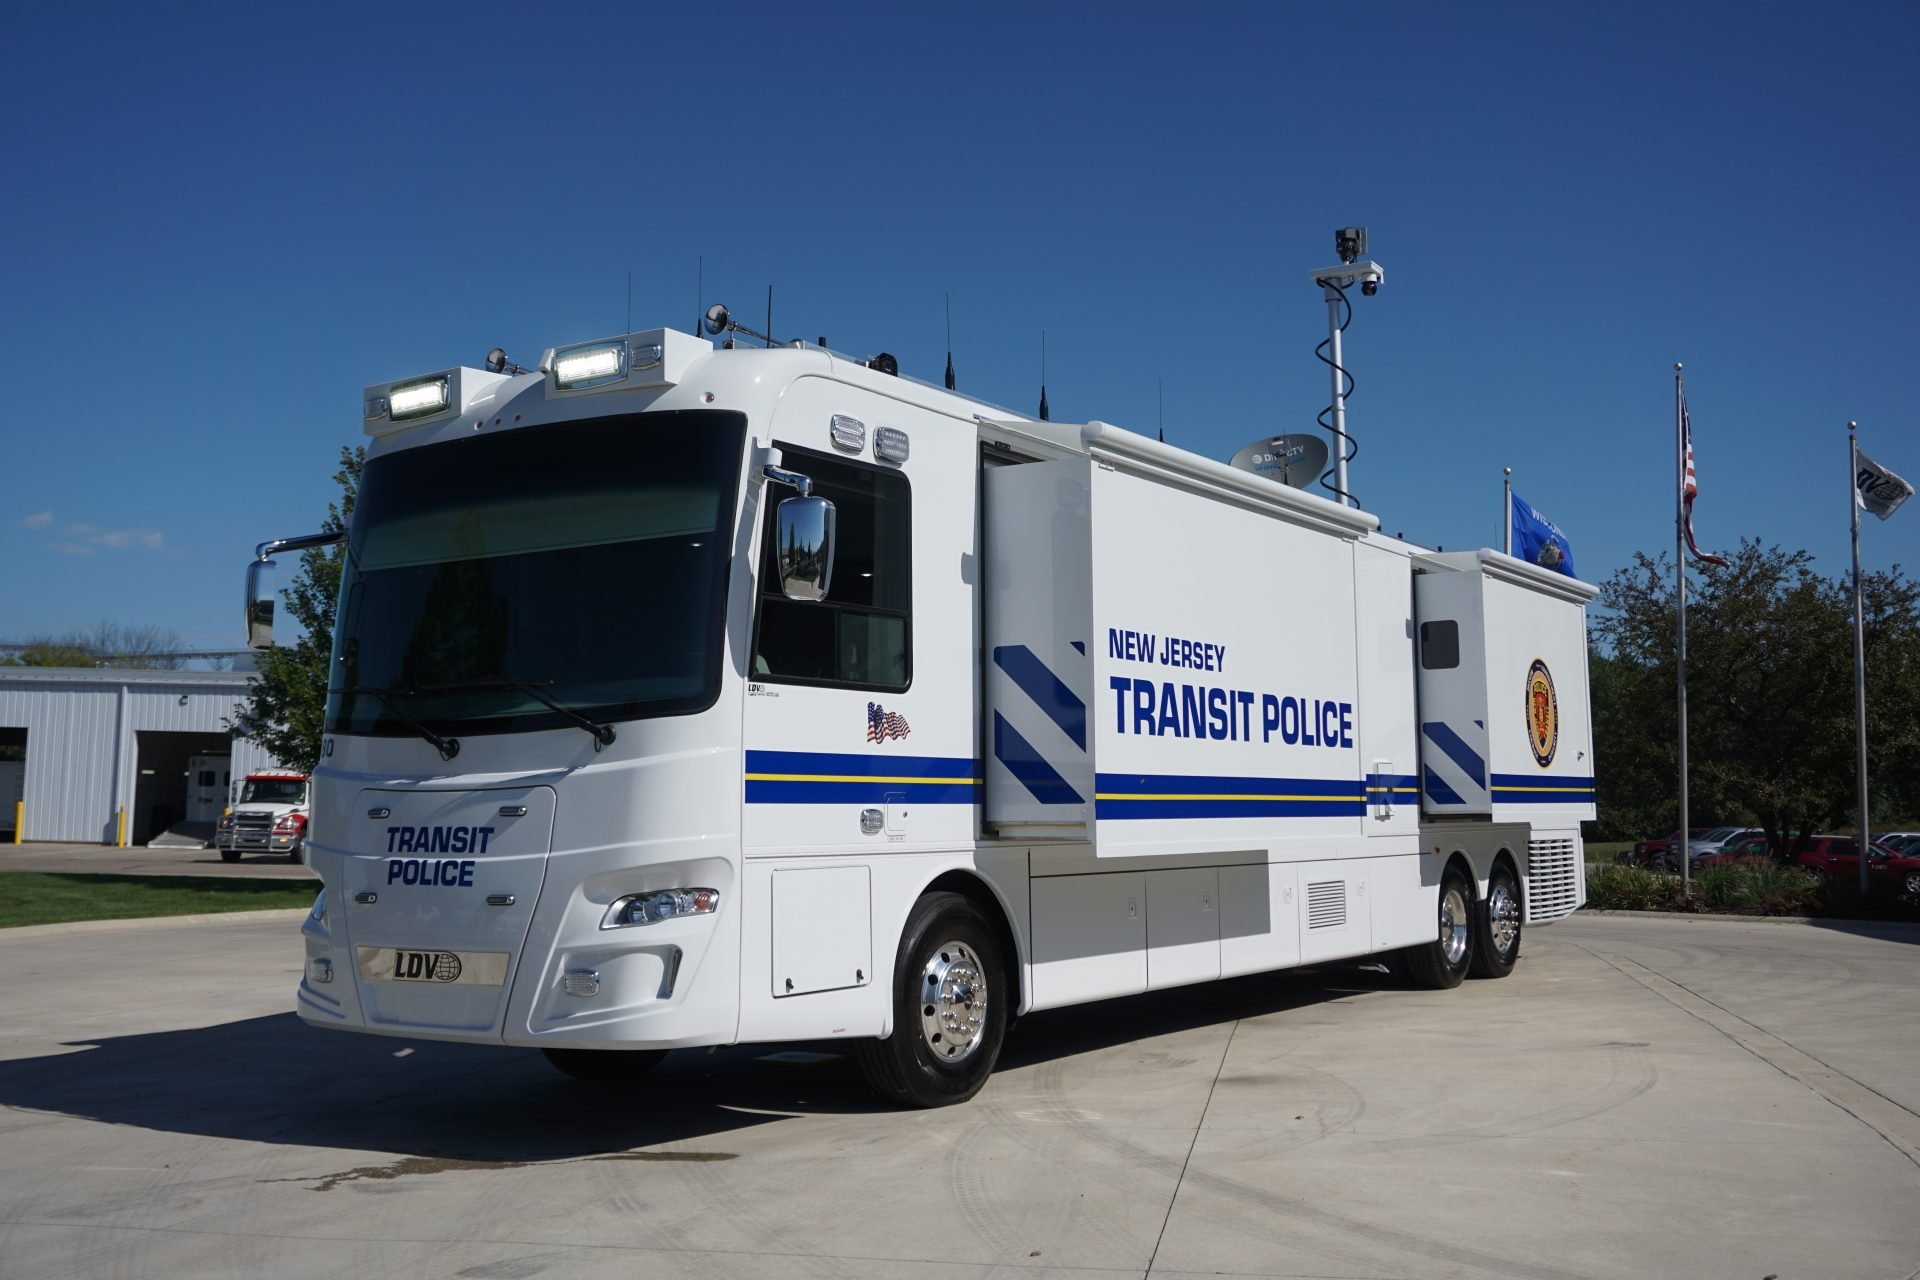 New Jersey Transit Police Mobile Command Center